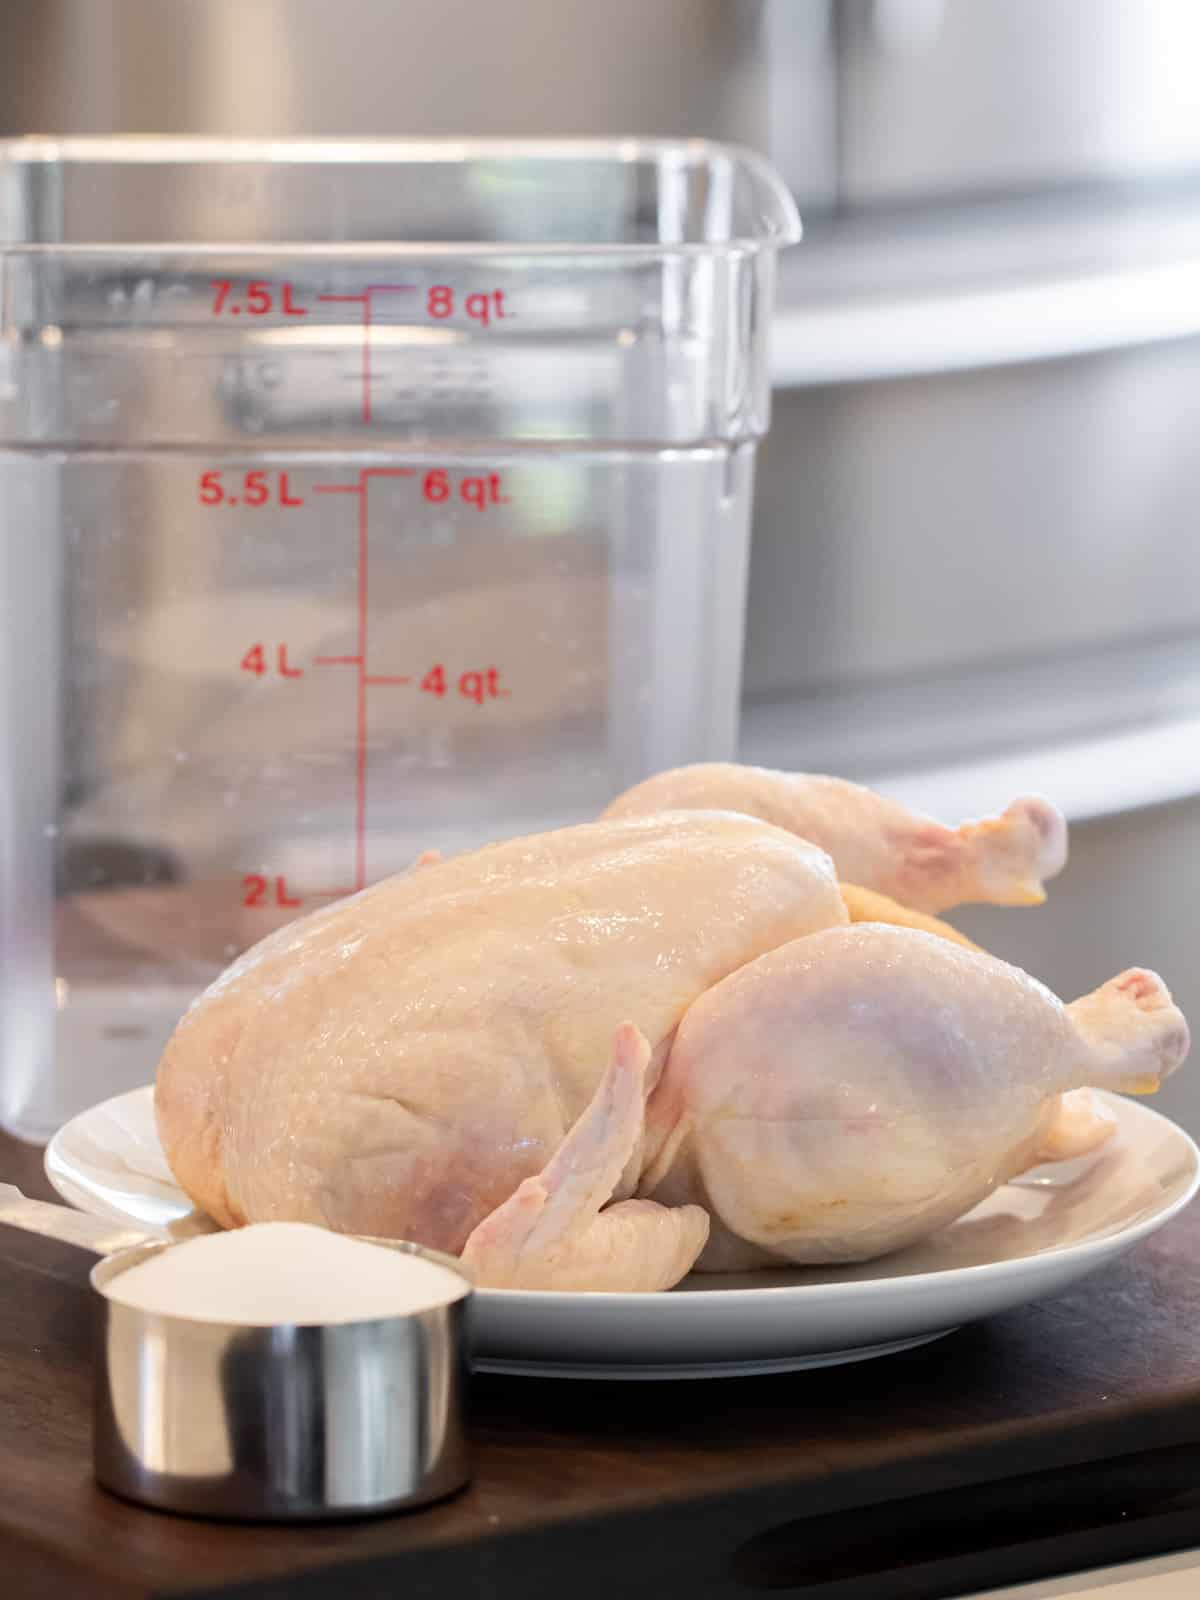 A raw chicken on a plate next to a measuring cup of salt.